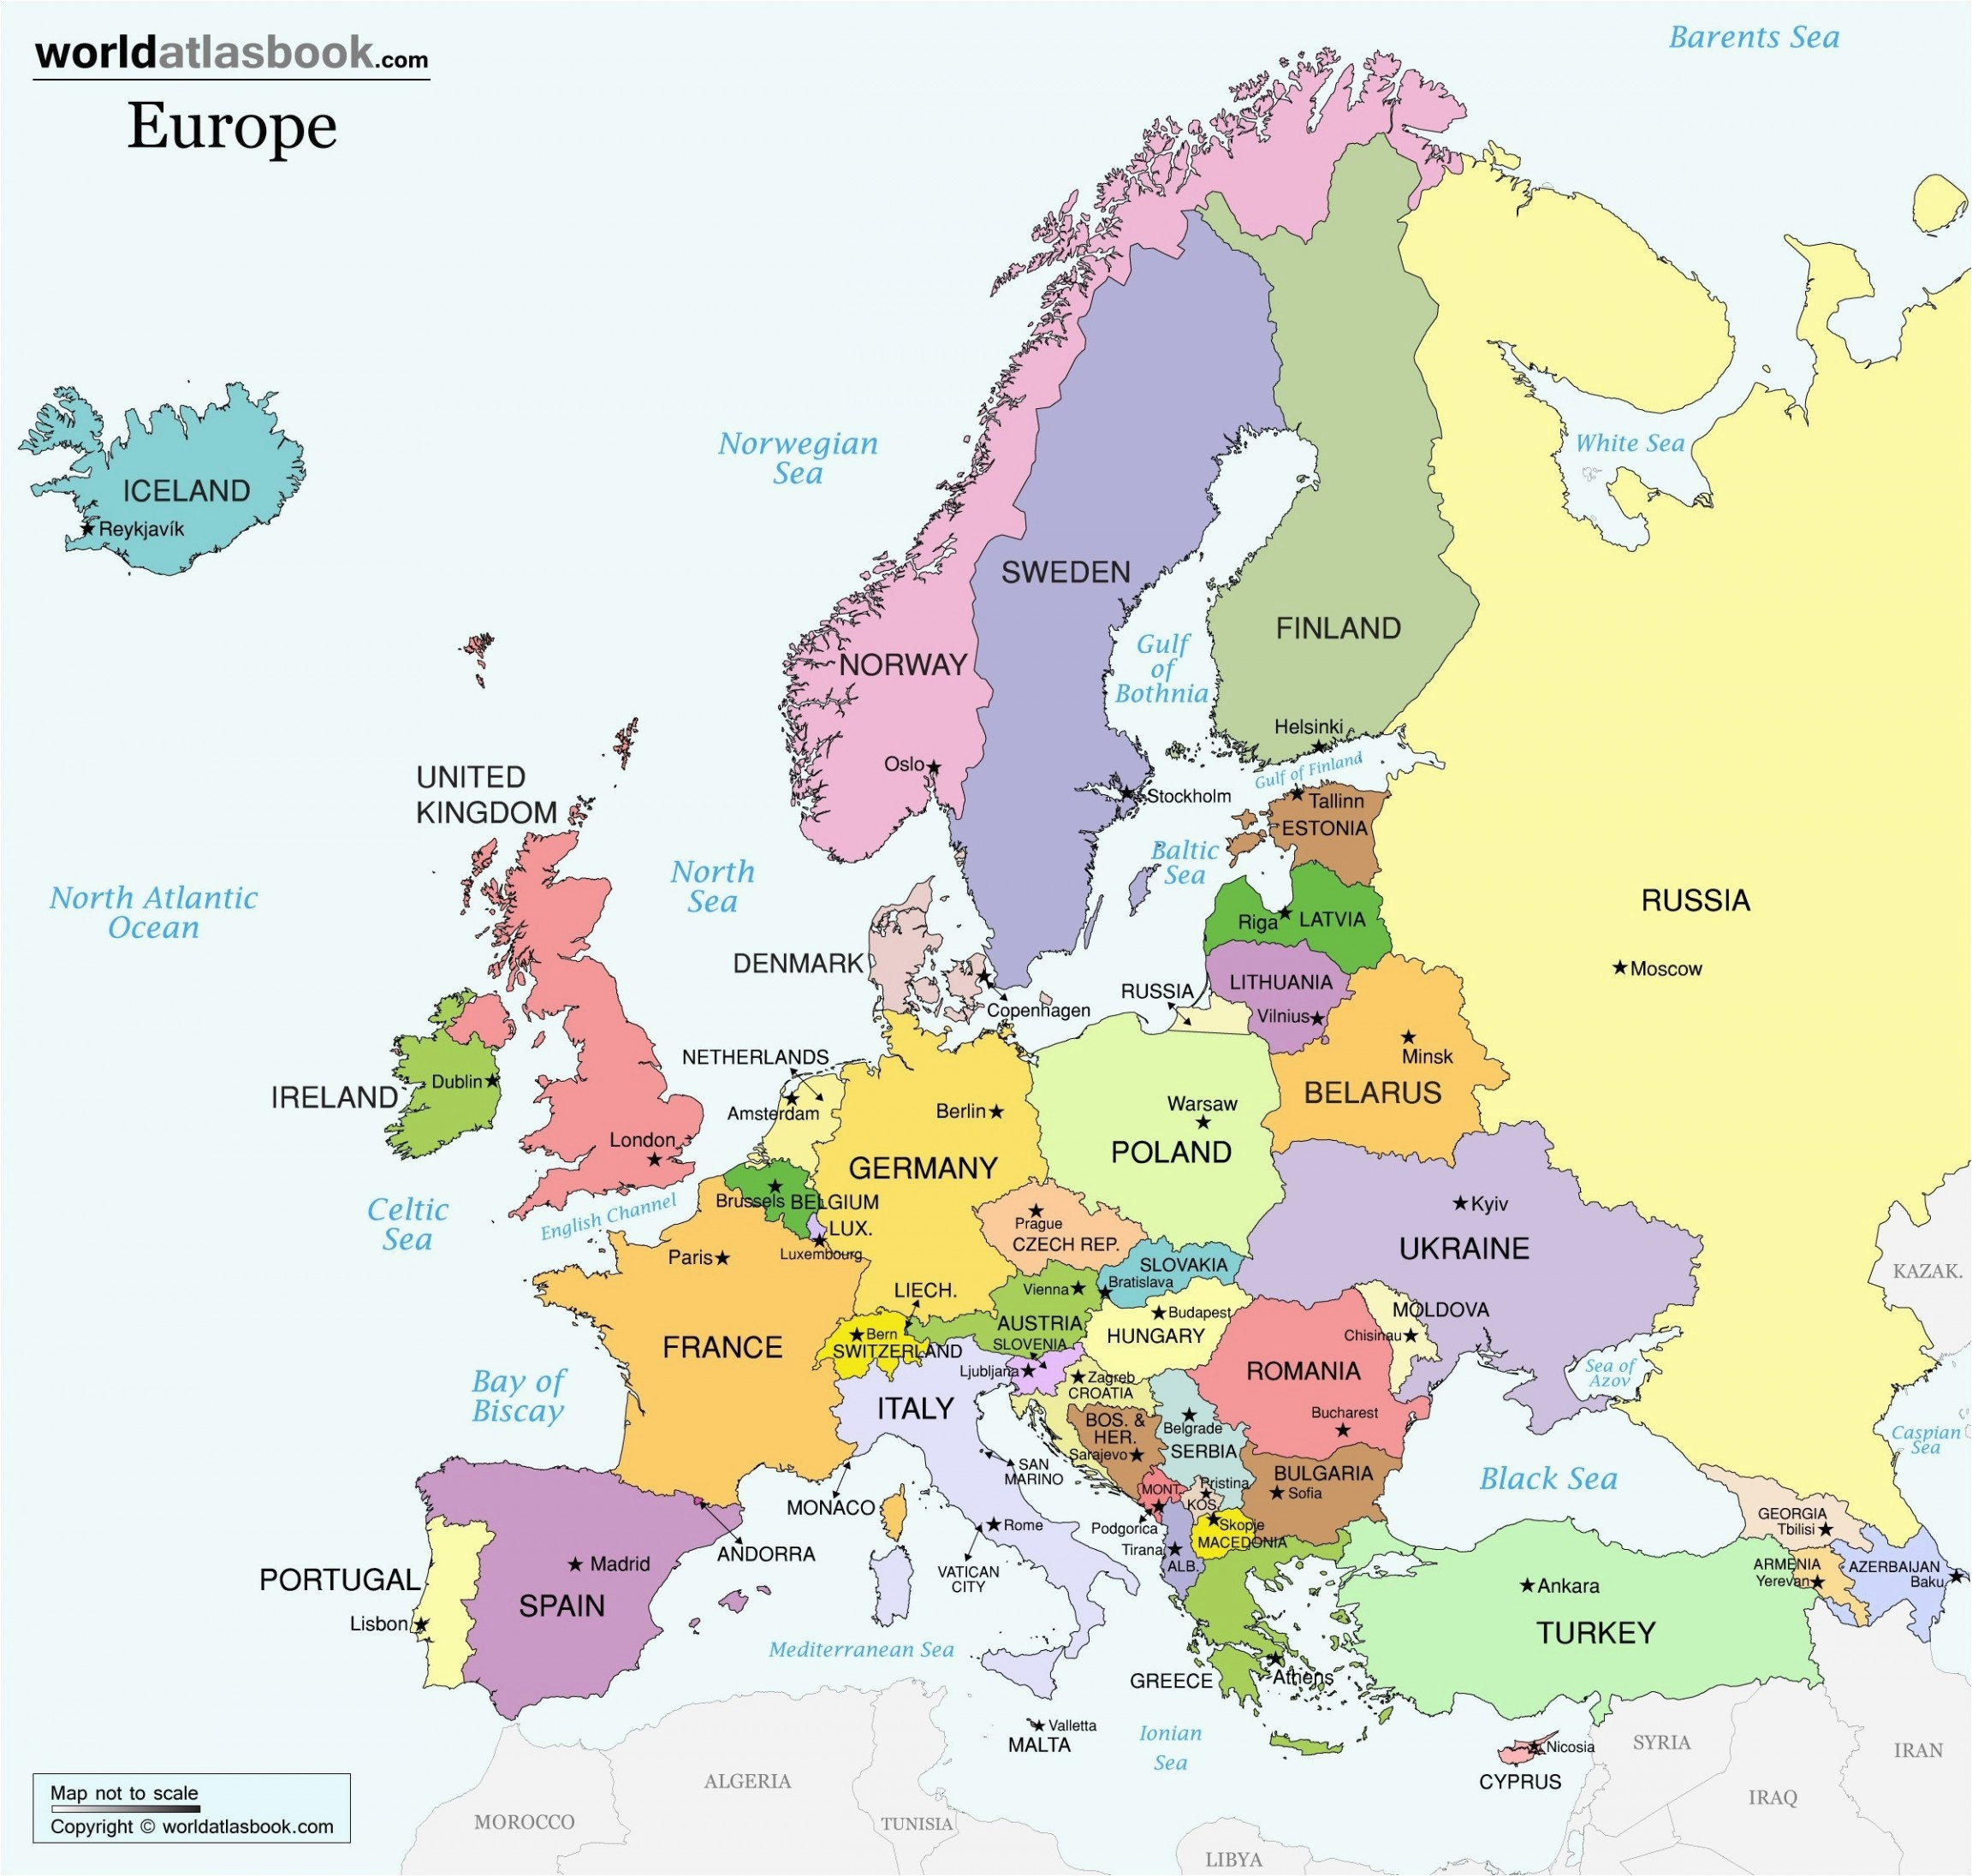 unlabeled map of europe climatejourney org